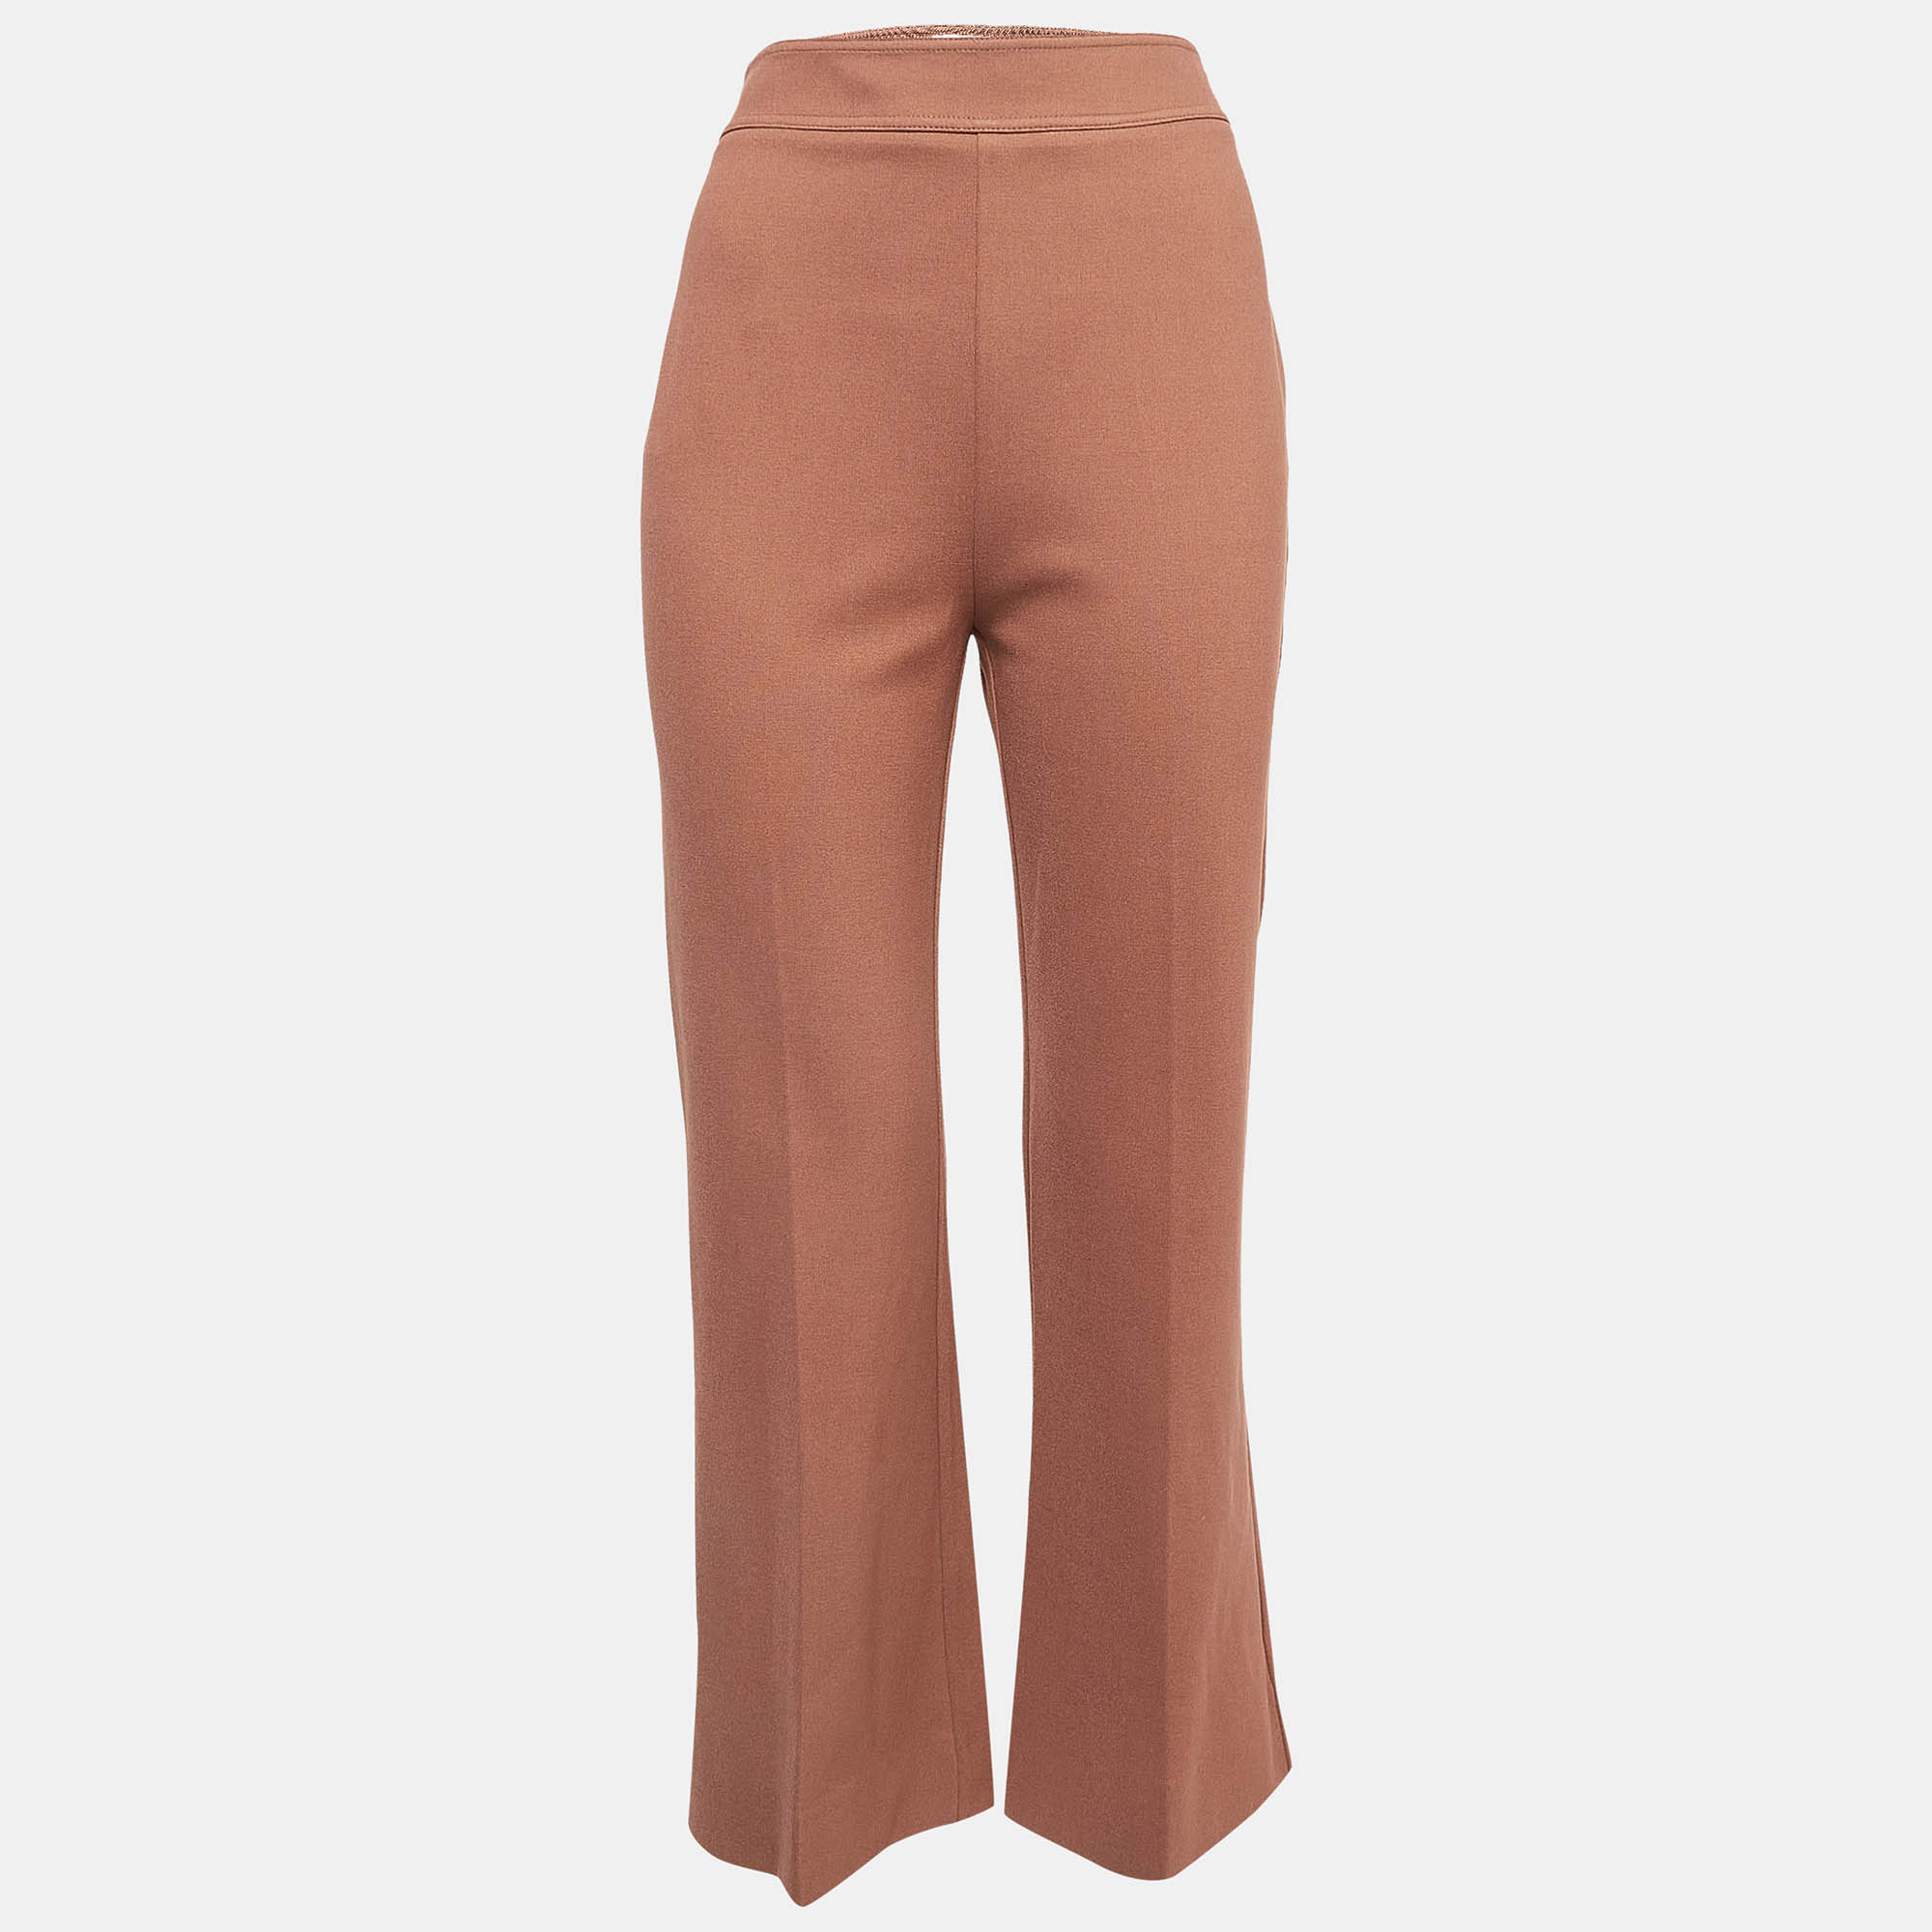 

Victoria Victoria Beckham Brown Stretch Knit Flared Trousers